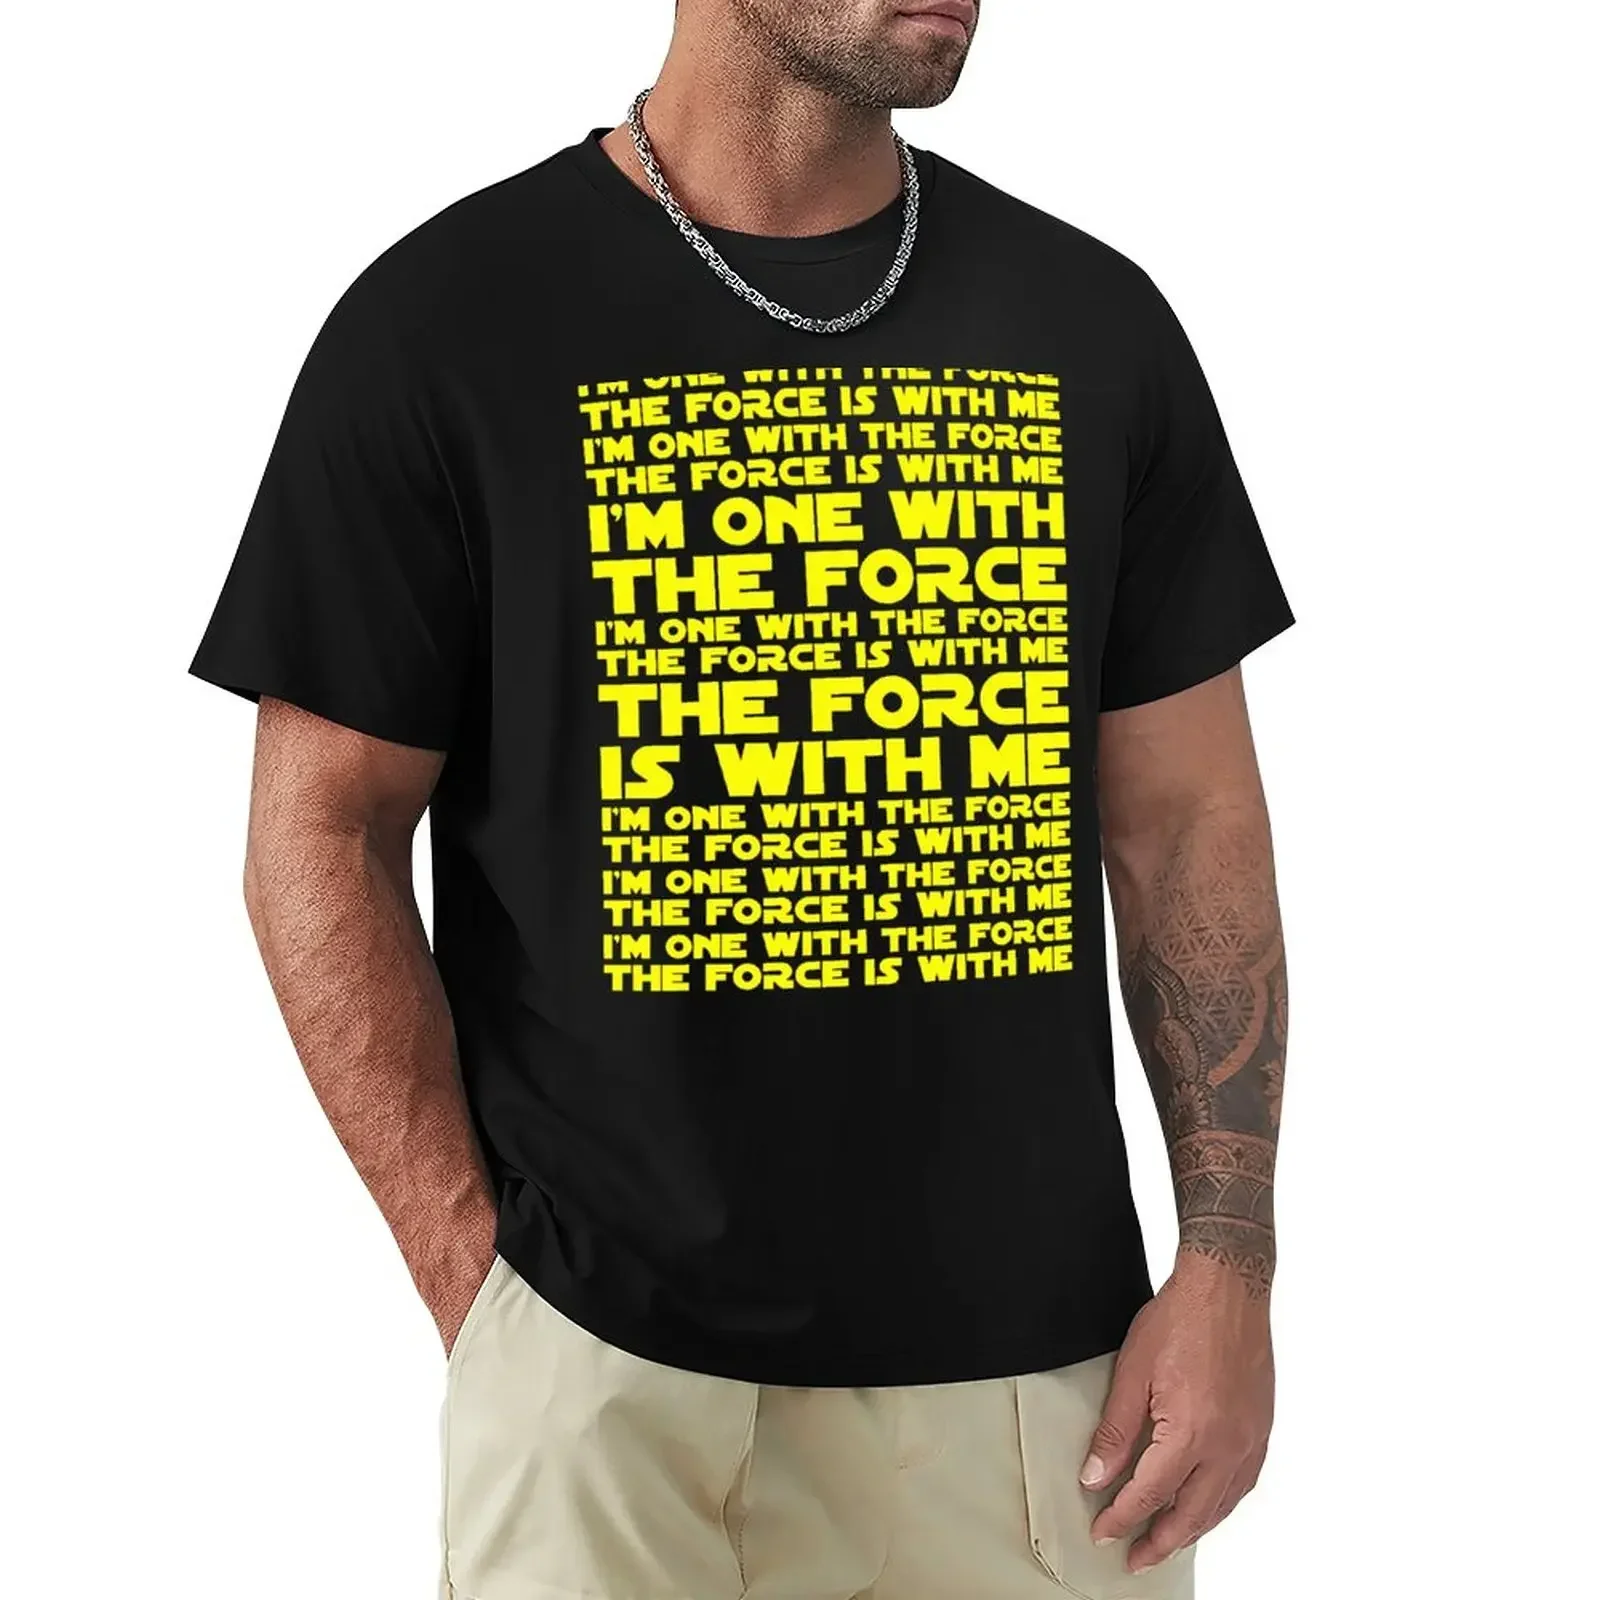 

The Force is with me and I am one with the Force T-Shirt sports fans boys whites aesthetic clothes Short sleeve tee men